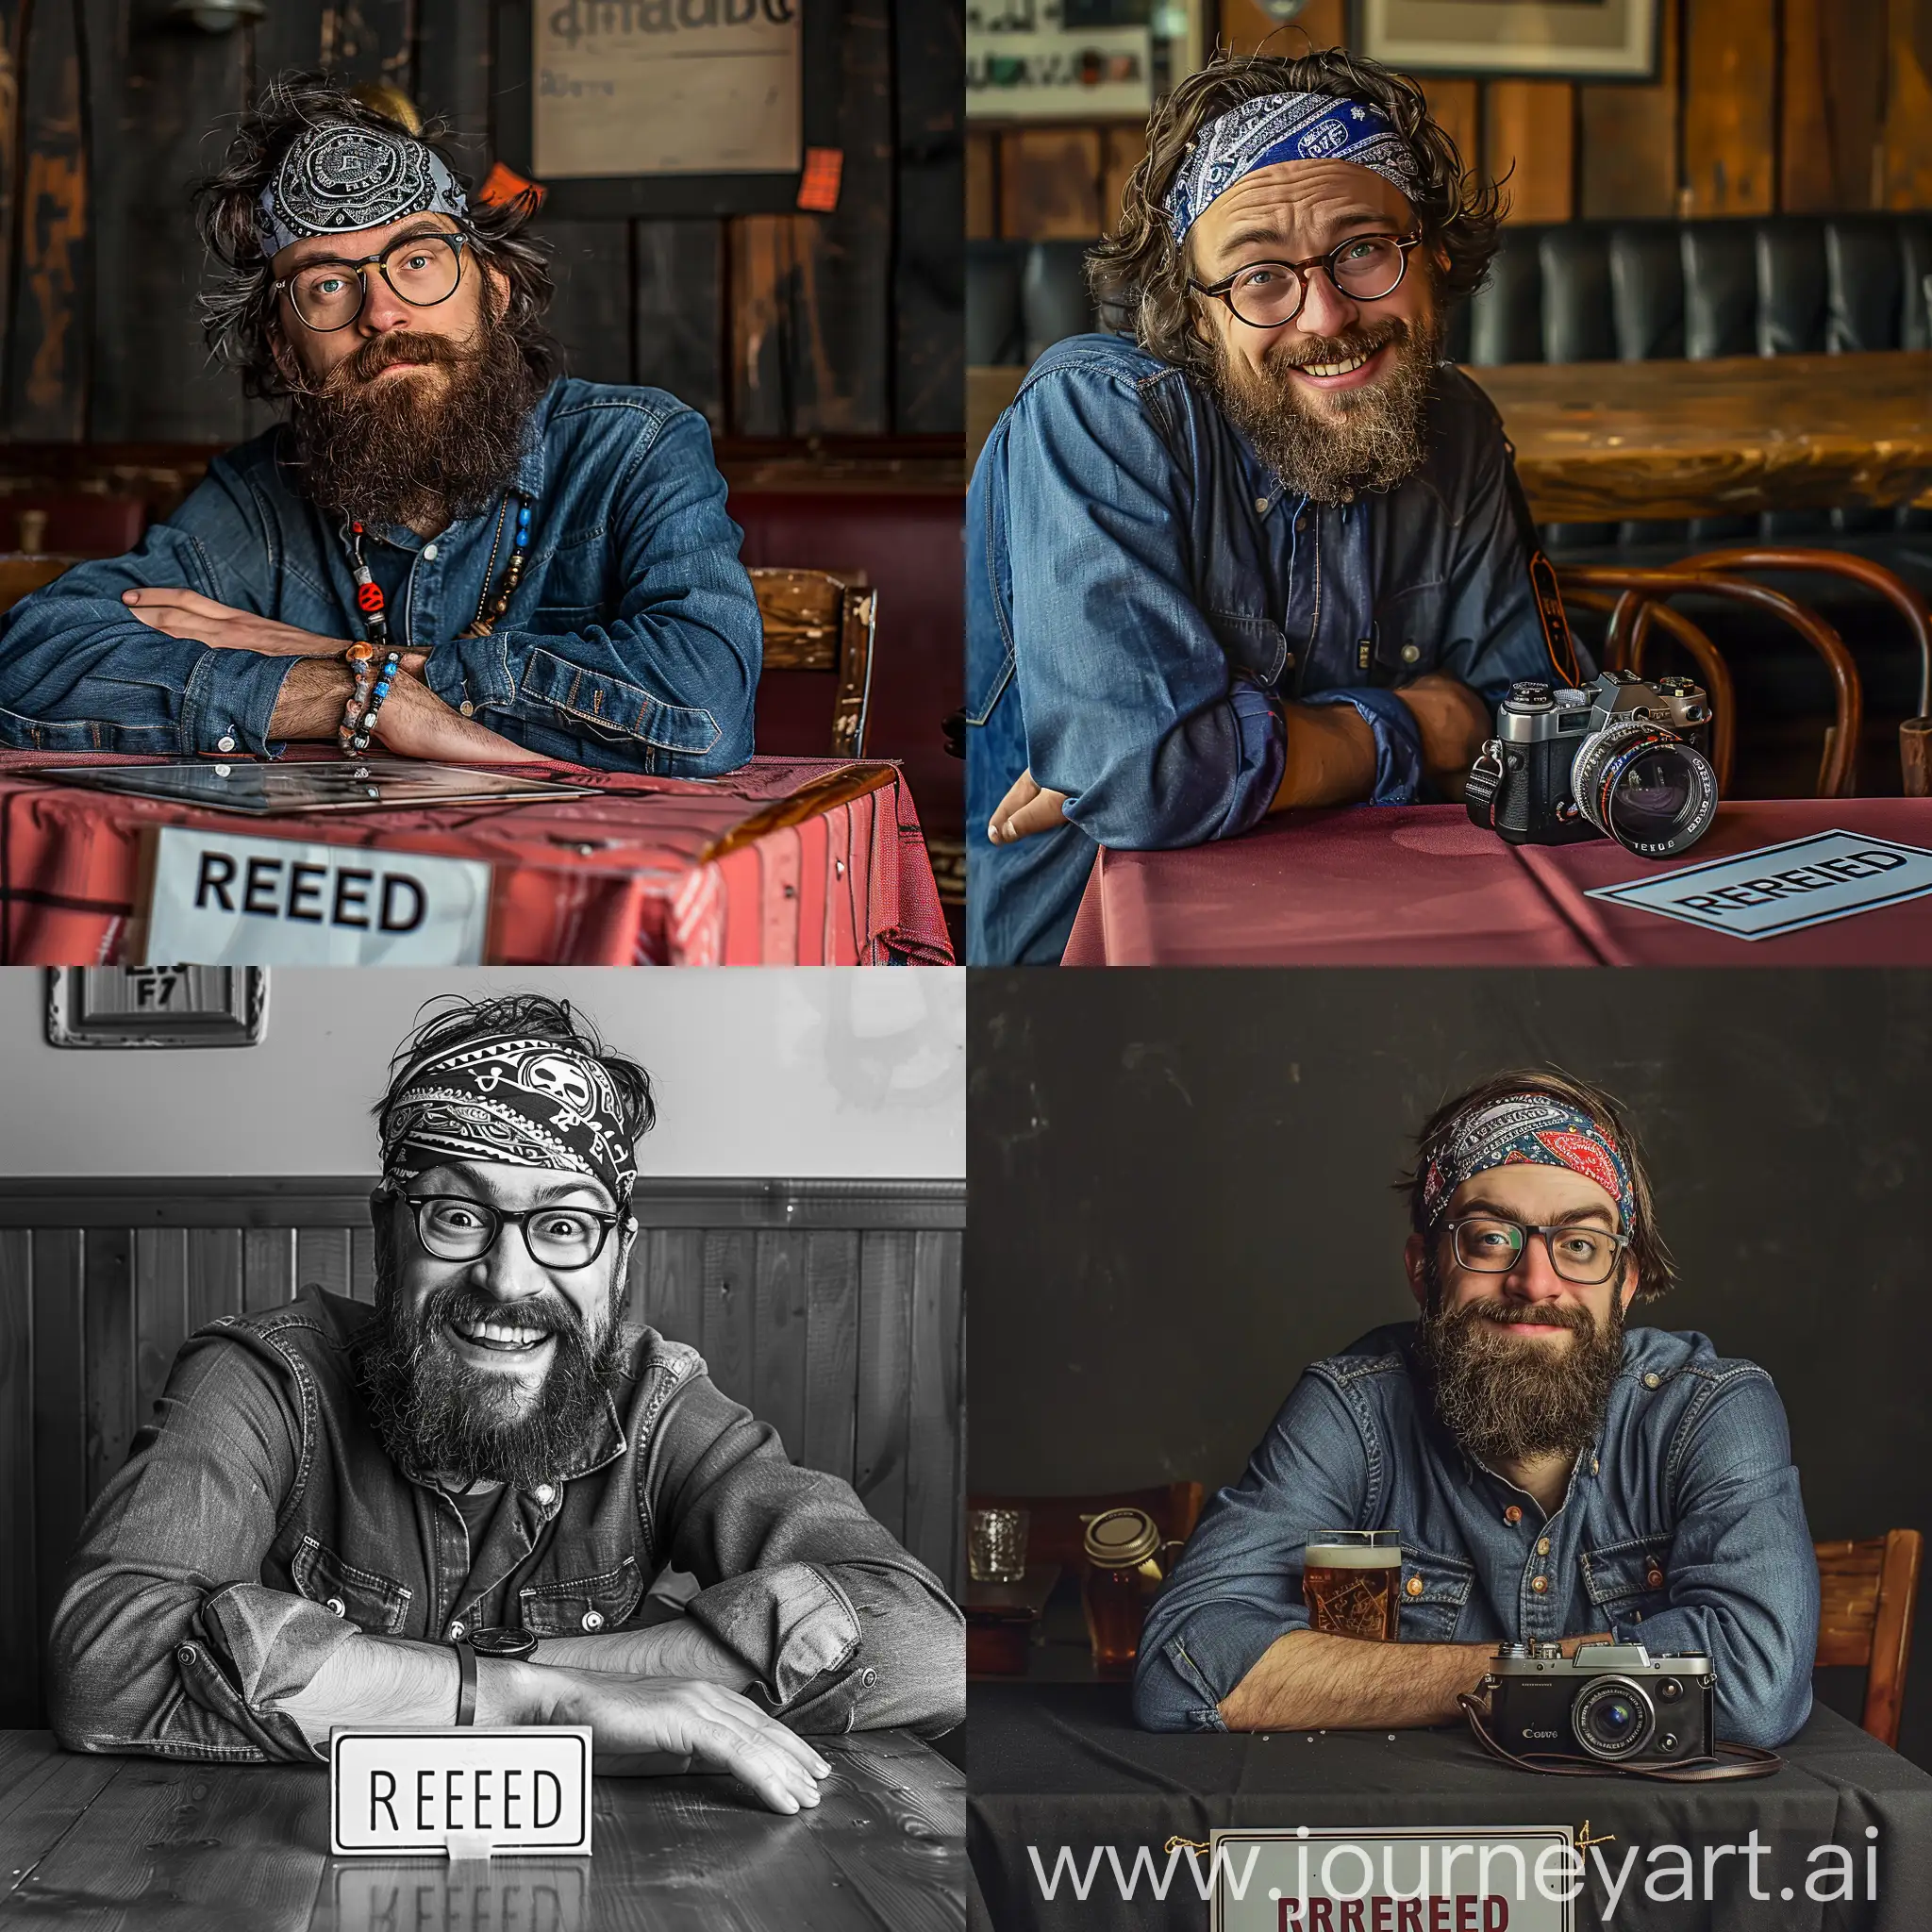 Bearded-Man-with-Goofy-Expression-at-Pub-Table